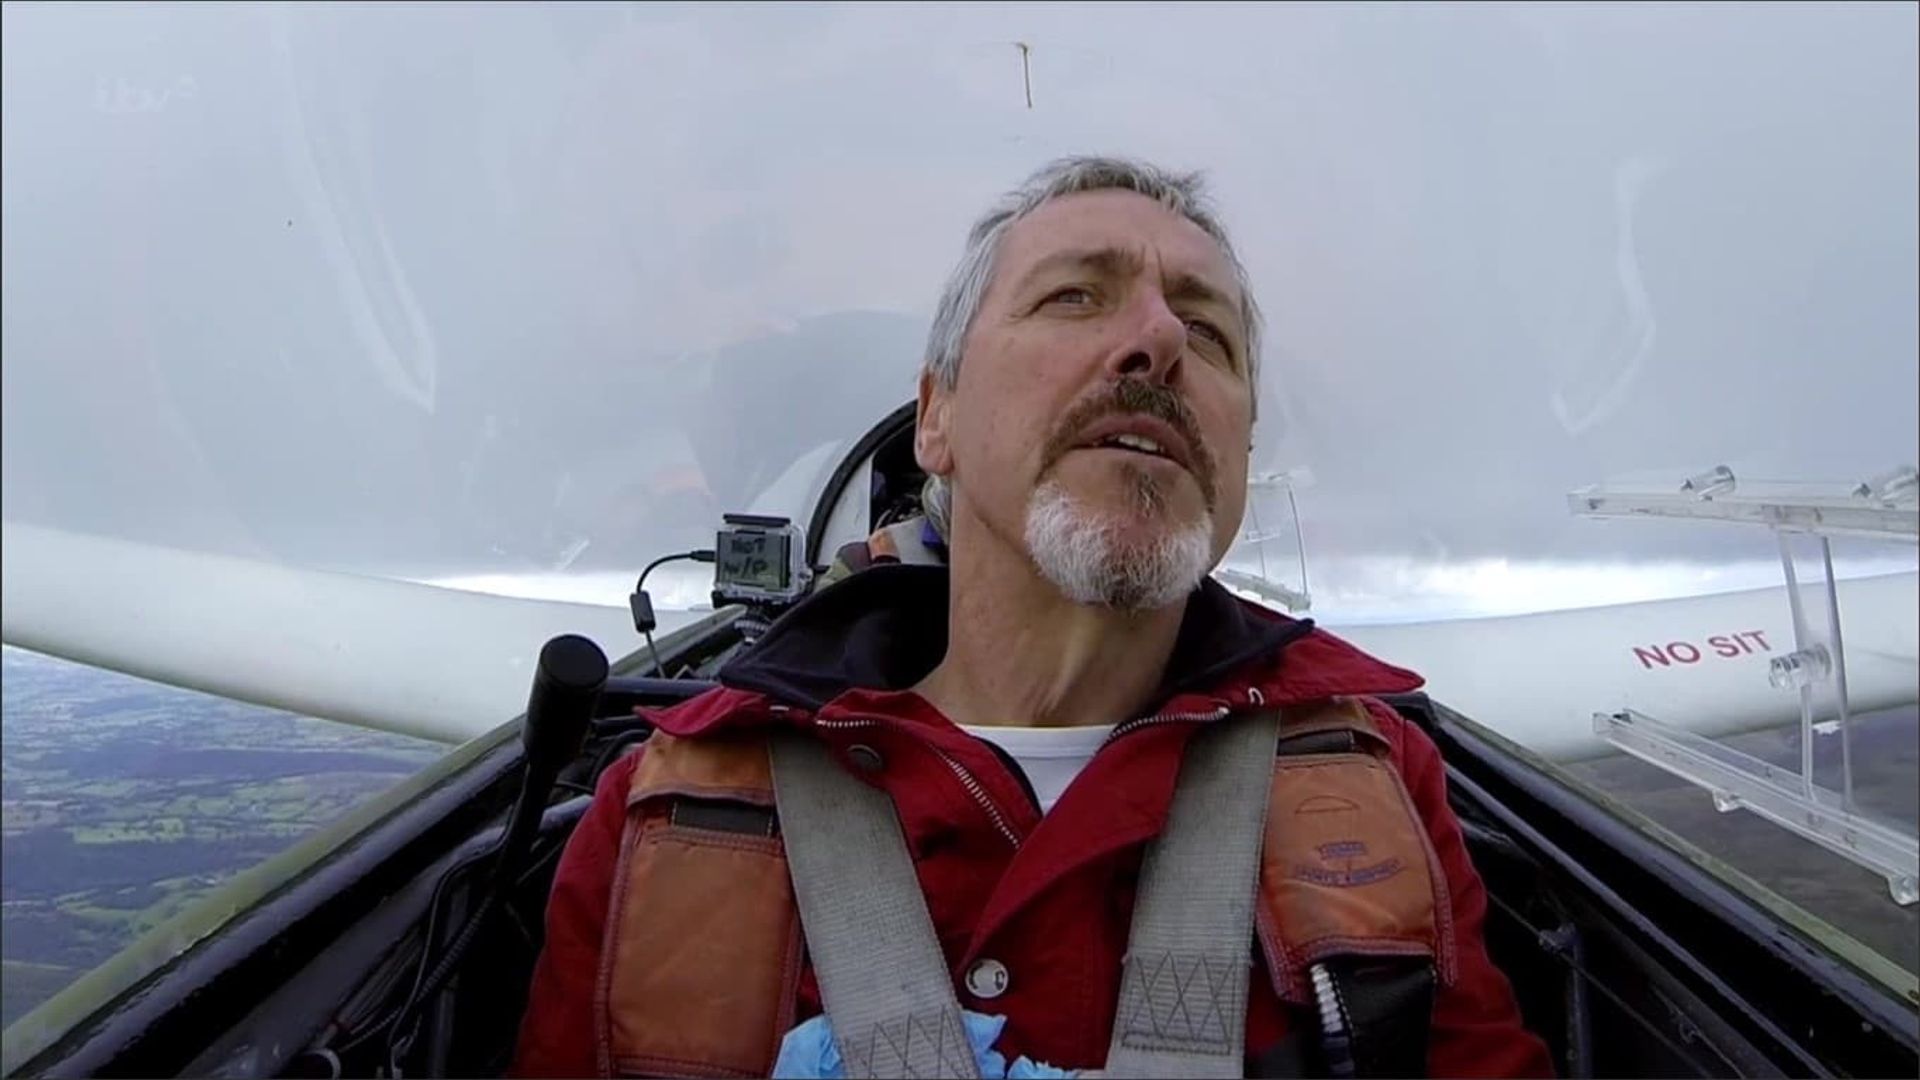 A Great Welsh Adventure with Griff Rhys Jones background